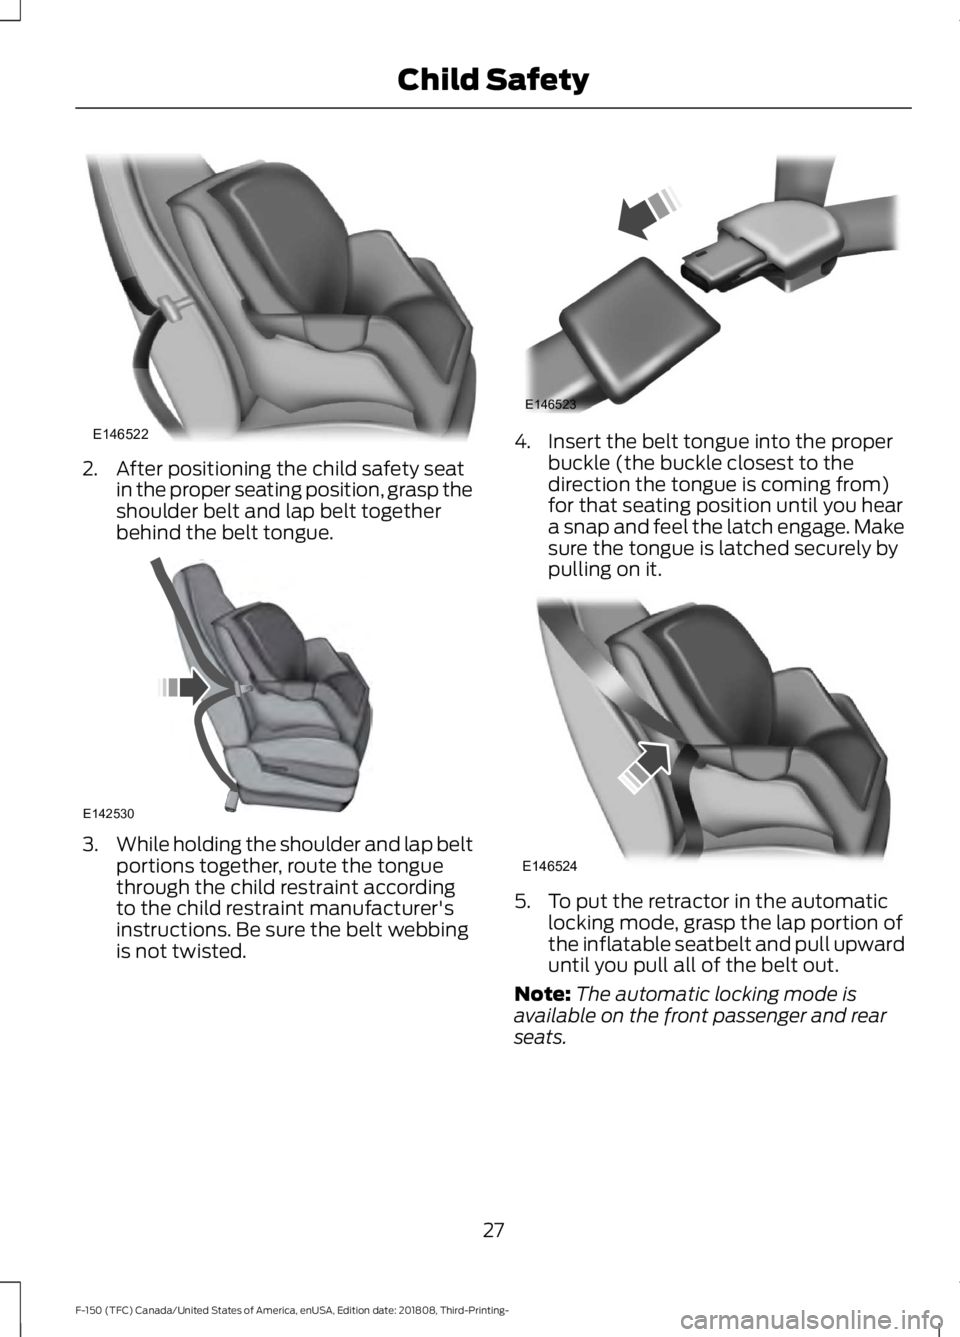 FORD F-150 2019  Owners Manual 2. After positioning the child safety seat
in the proper seating position, grasp the
shoulder belt and lap belt together
behind the belt tongue. 3.
While holding the shoulder and lap belt
portions tog